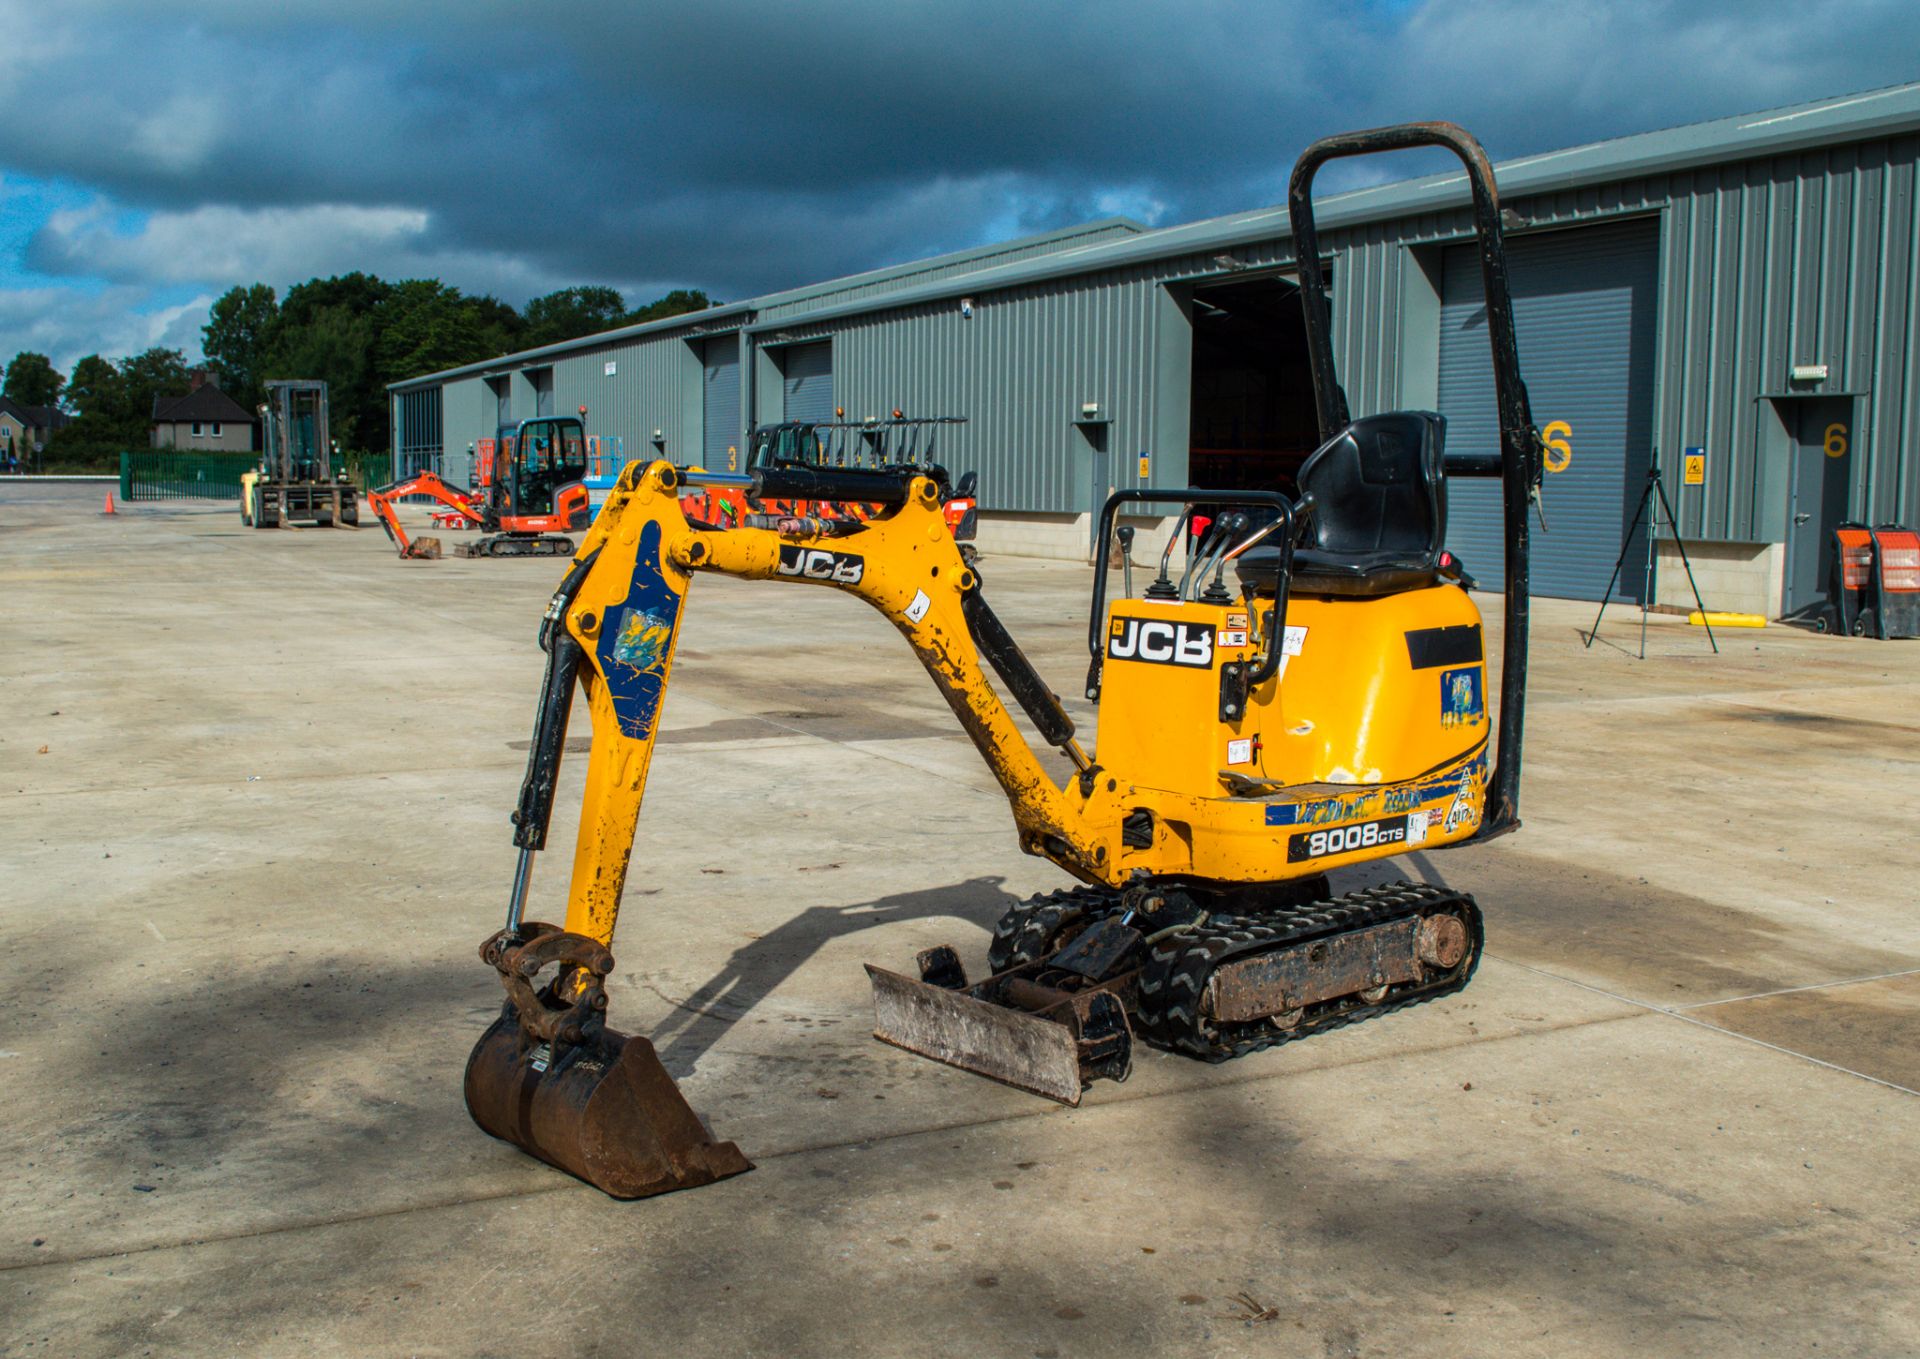 JCB 8008cts 0.8 tonne rubber tracked micro excavator Year: 2018 S/N: 749894 Recorded Hours: 980